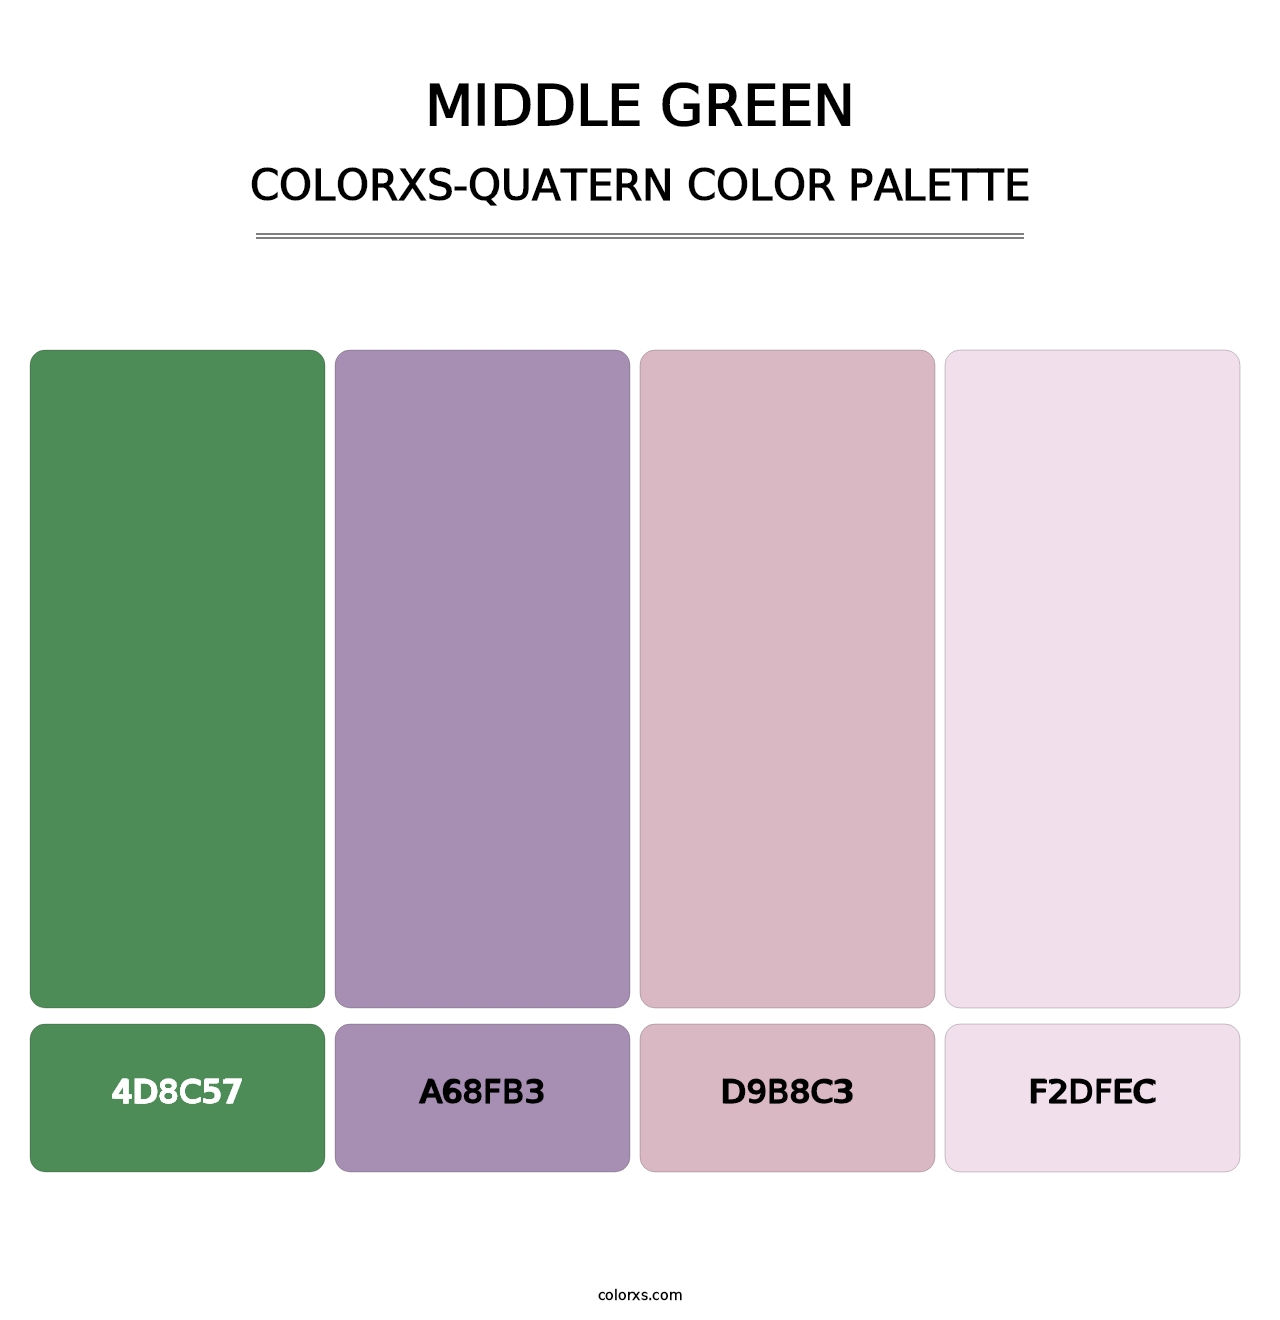 Middle Green - Colorxs Quatern Palette